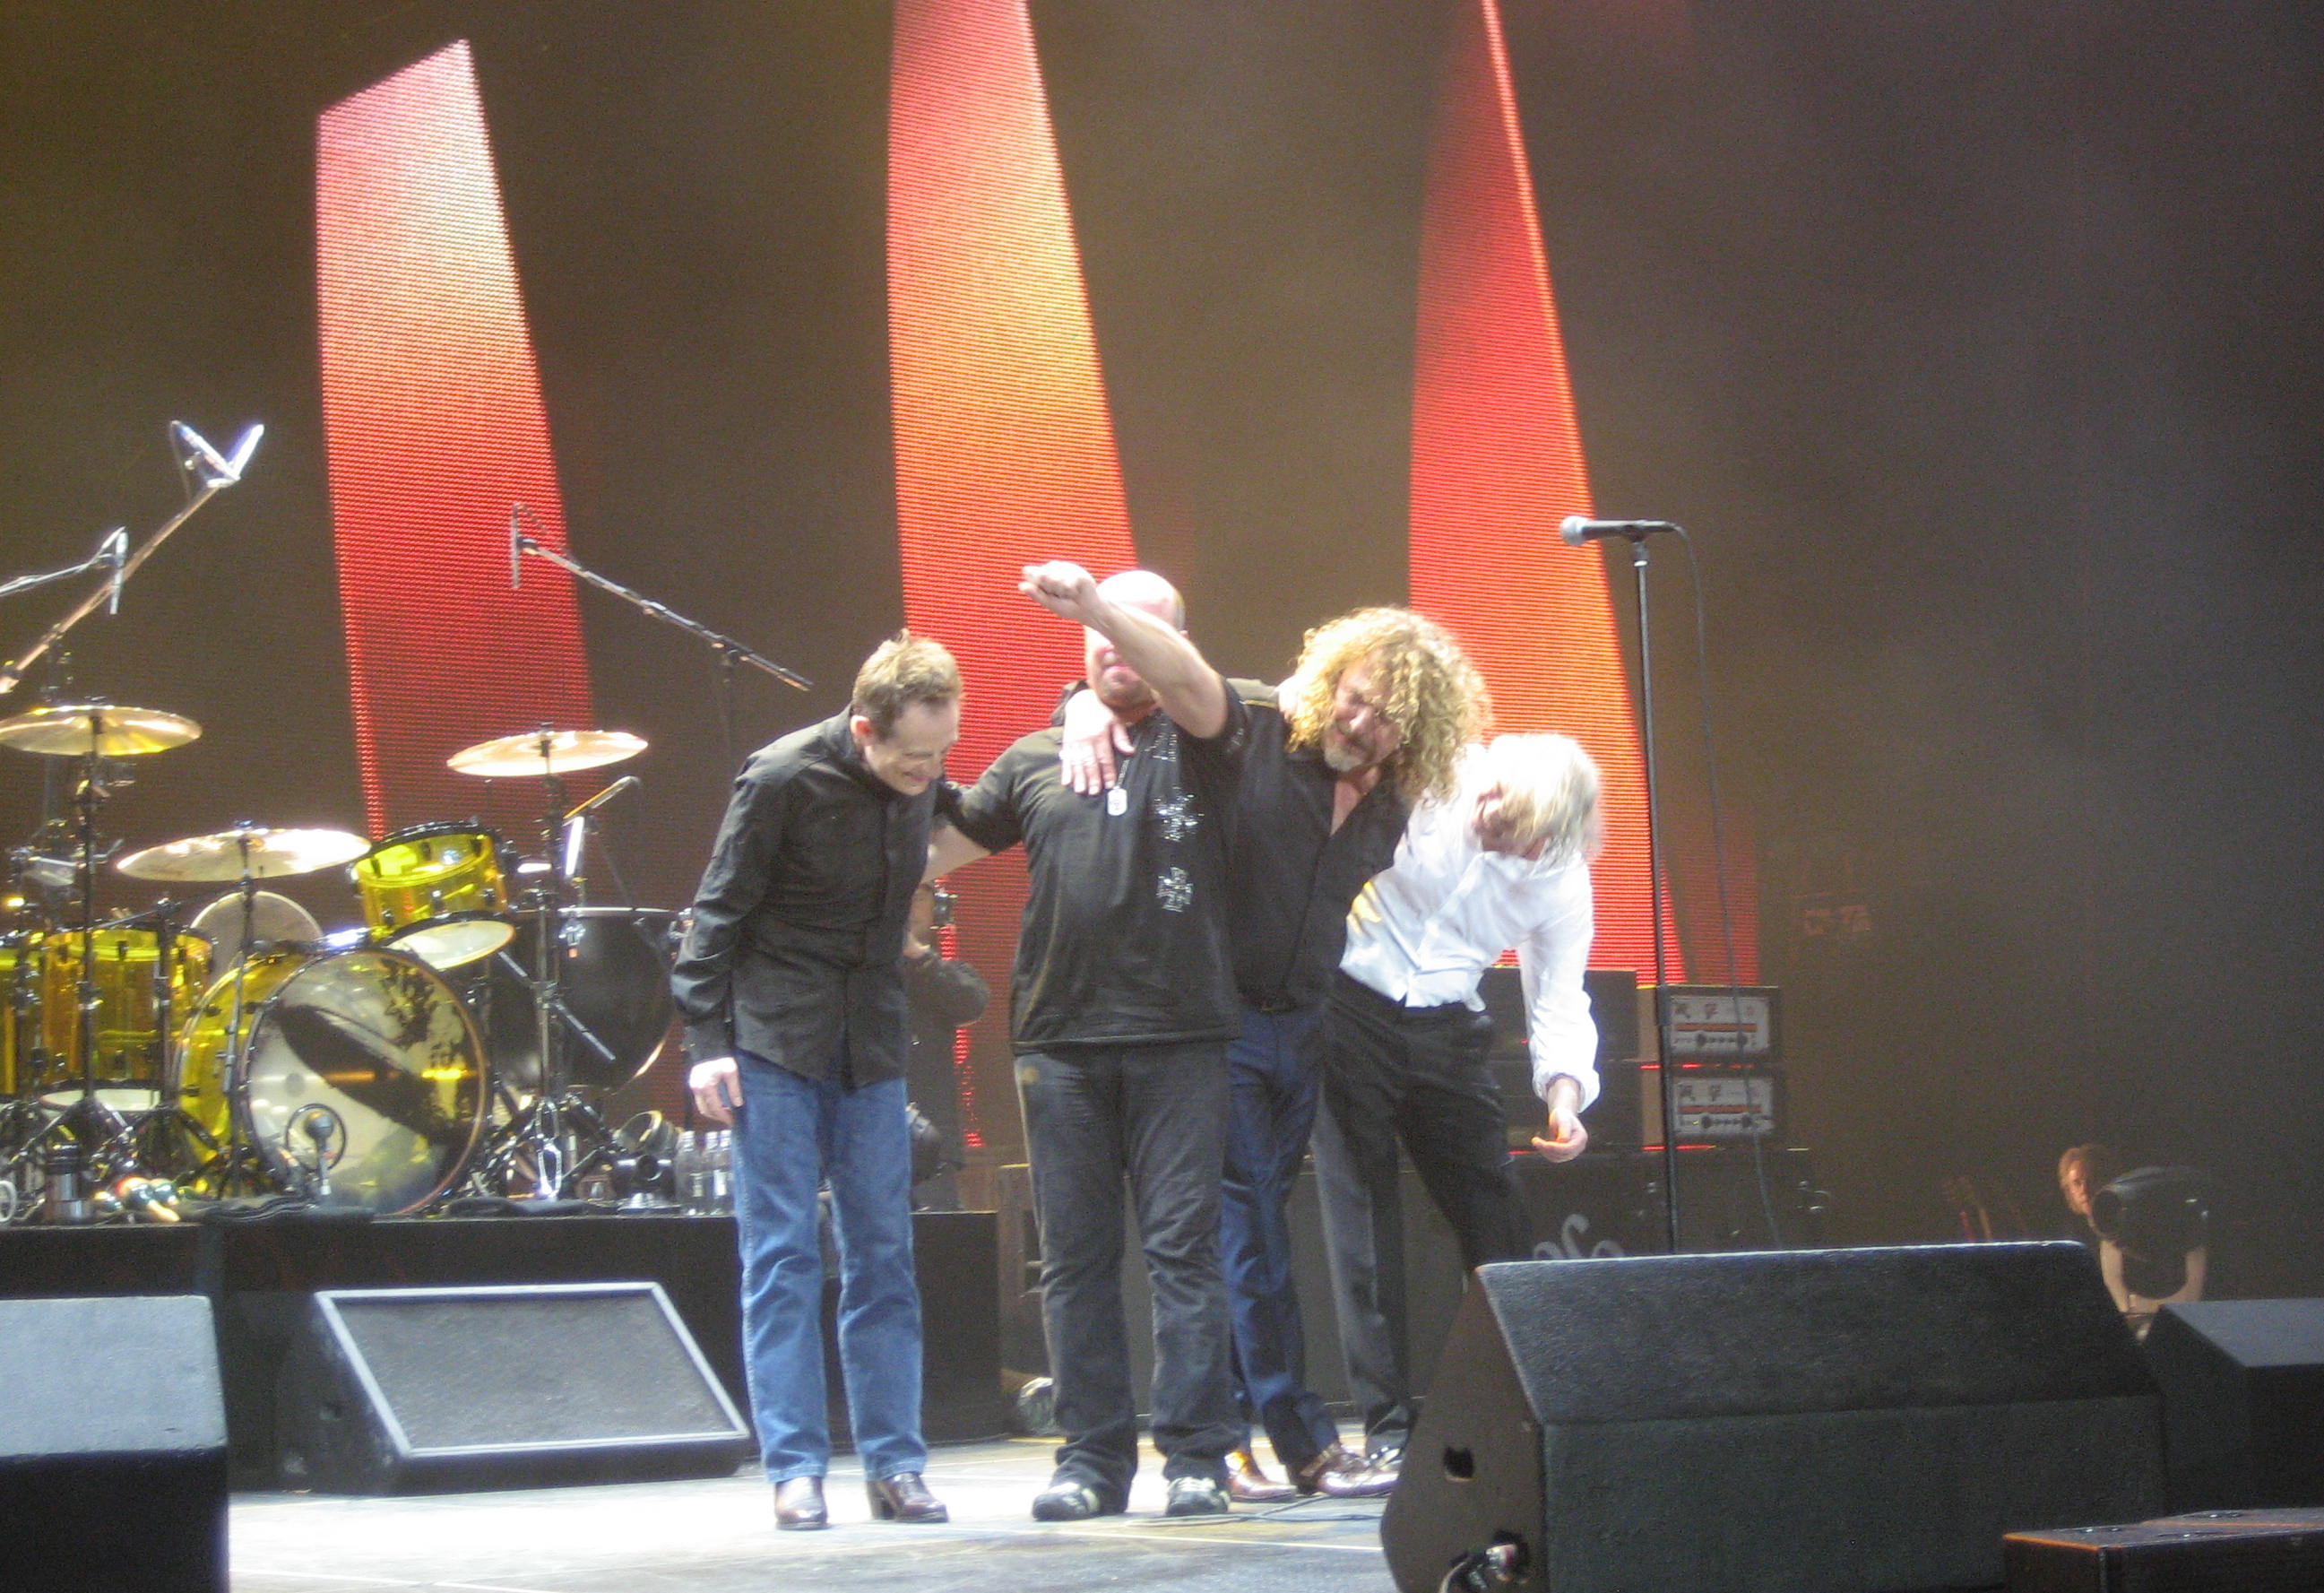 Tight But Loose » Blog Archive LED ZEPPELIN 02 REUNION FOR AHMET ERTEGUN IT WAS YEARS AGO TODAY... - Tight But Loose